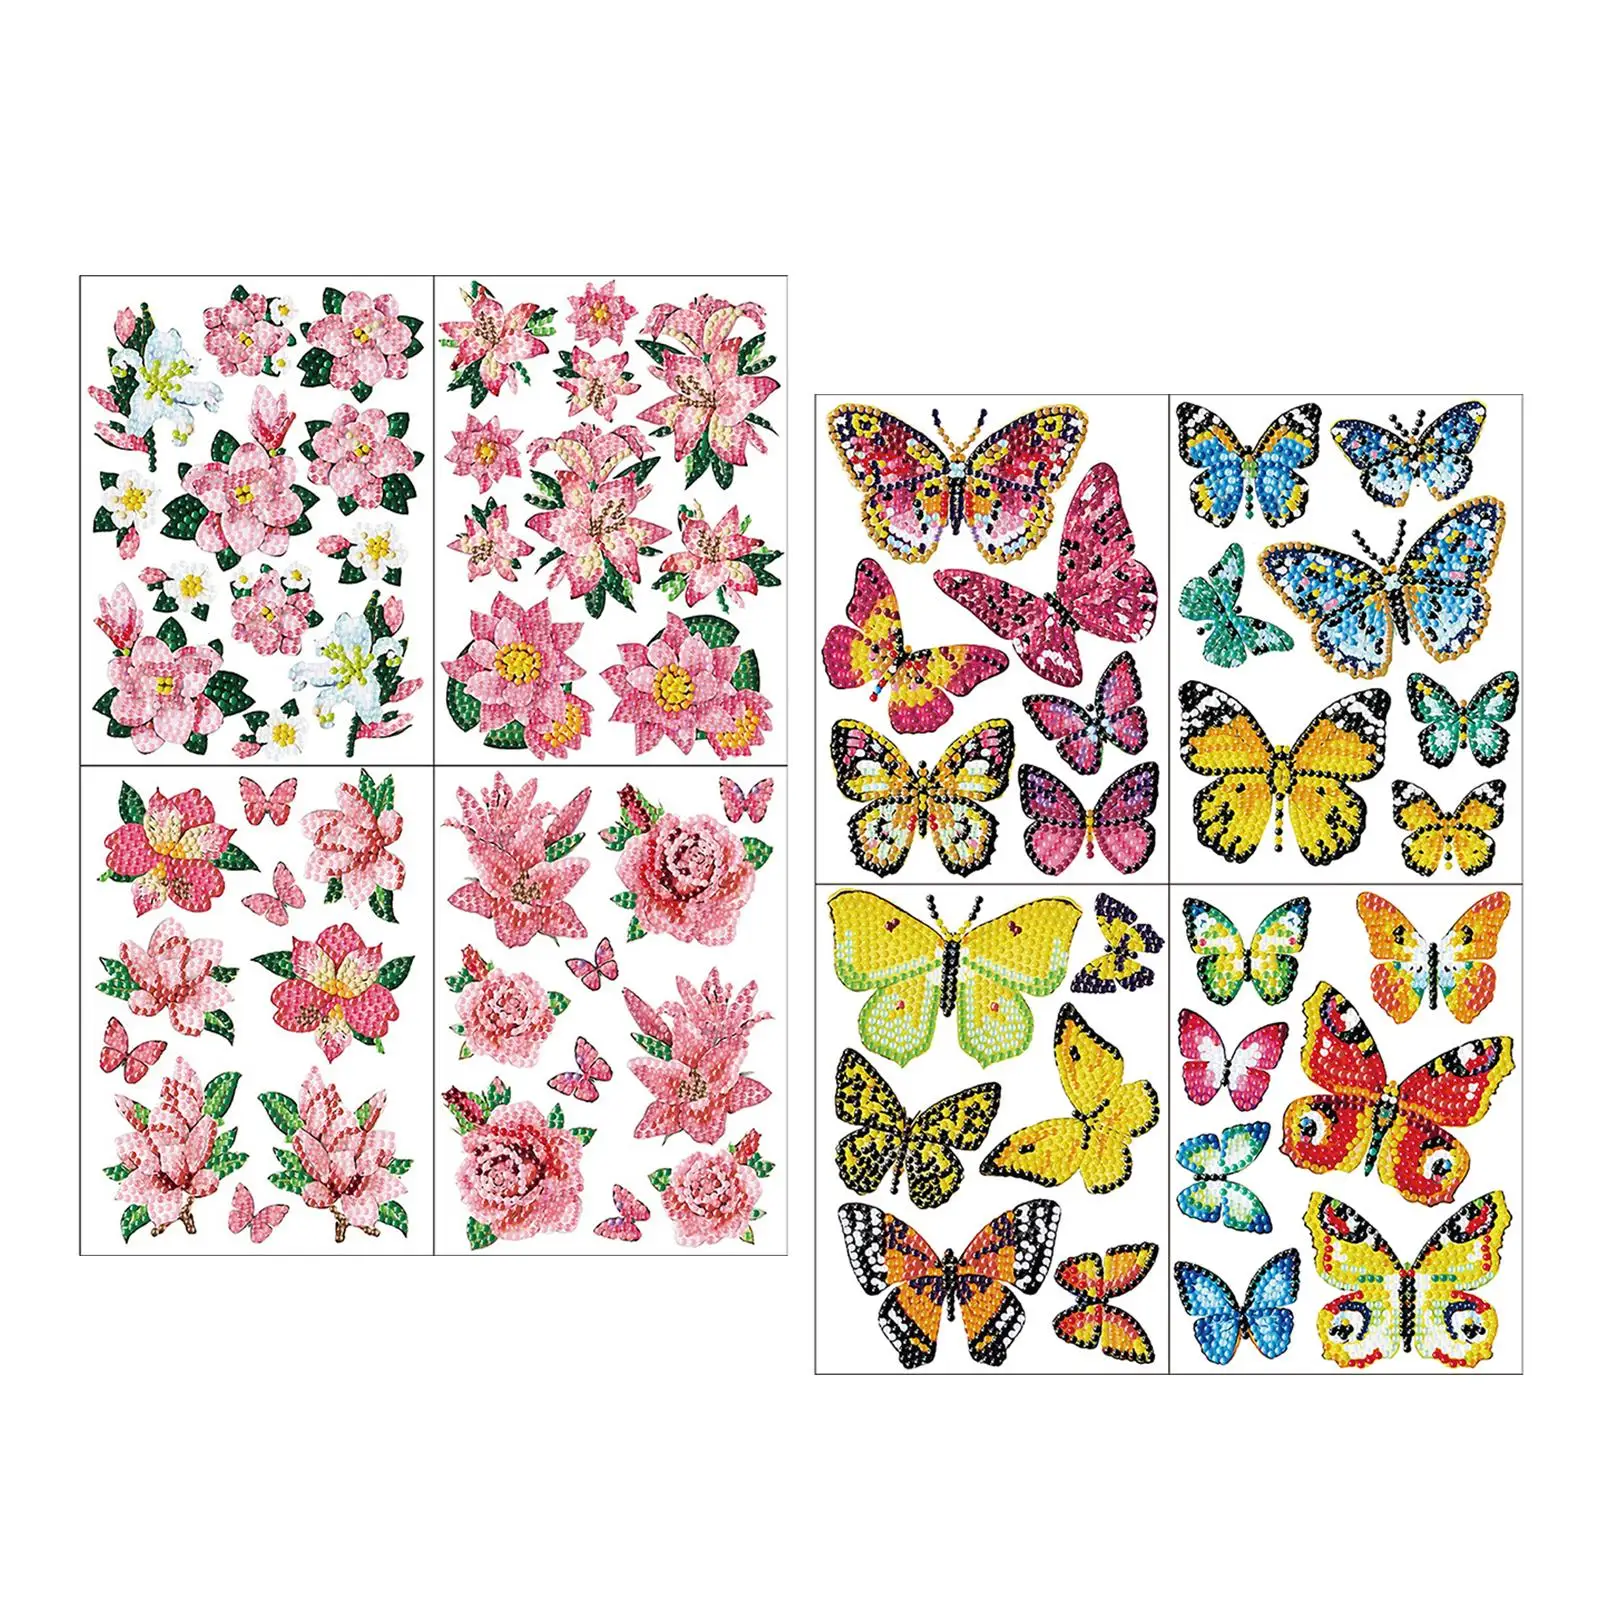 5D DIY Diamond Painting Stickers Set Crafts Embroidery Art Gift Creative for Door Home Birthday Refrigerator